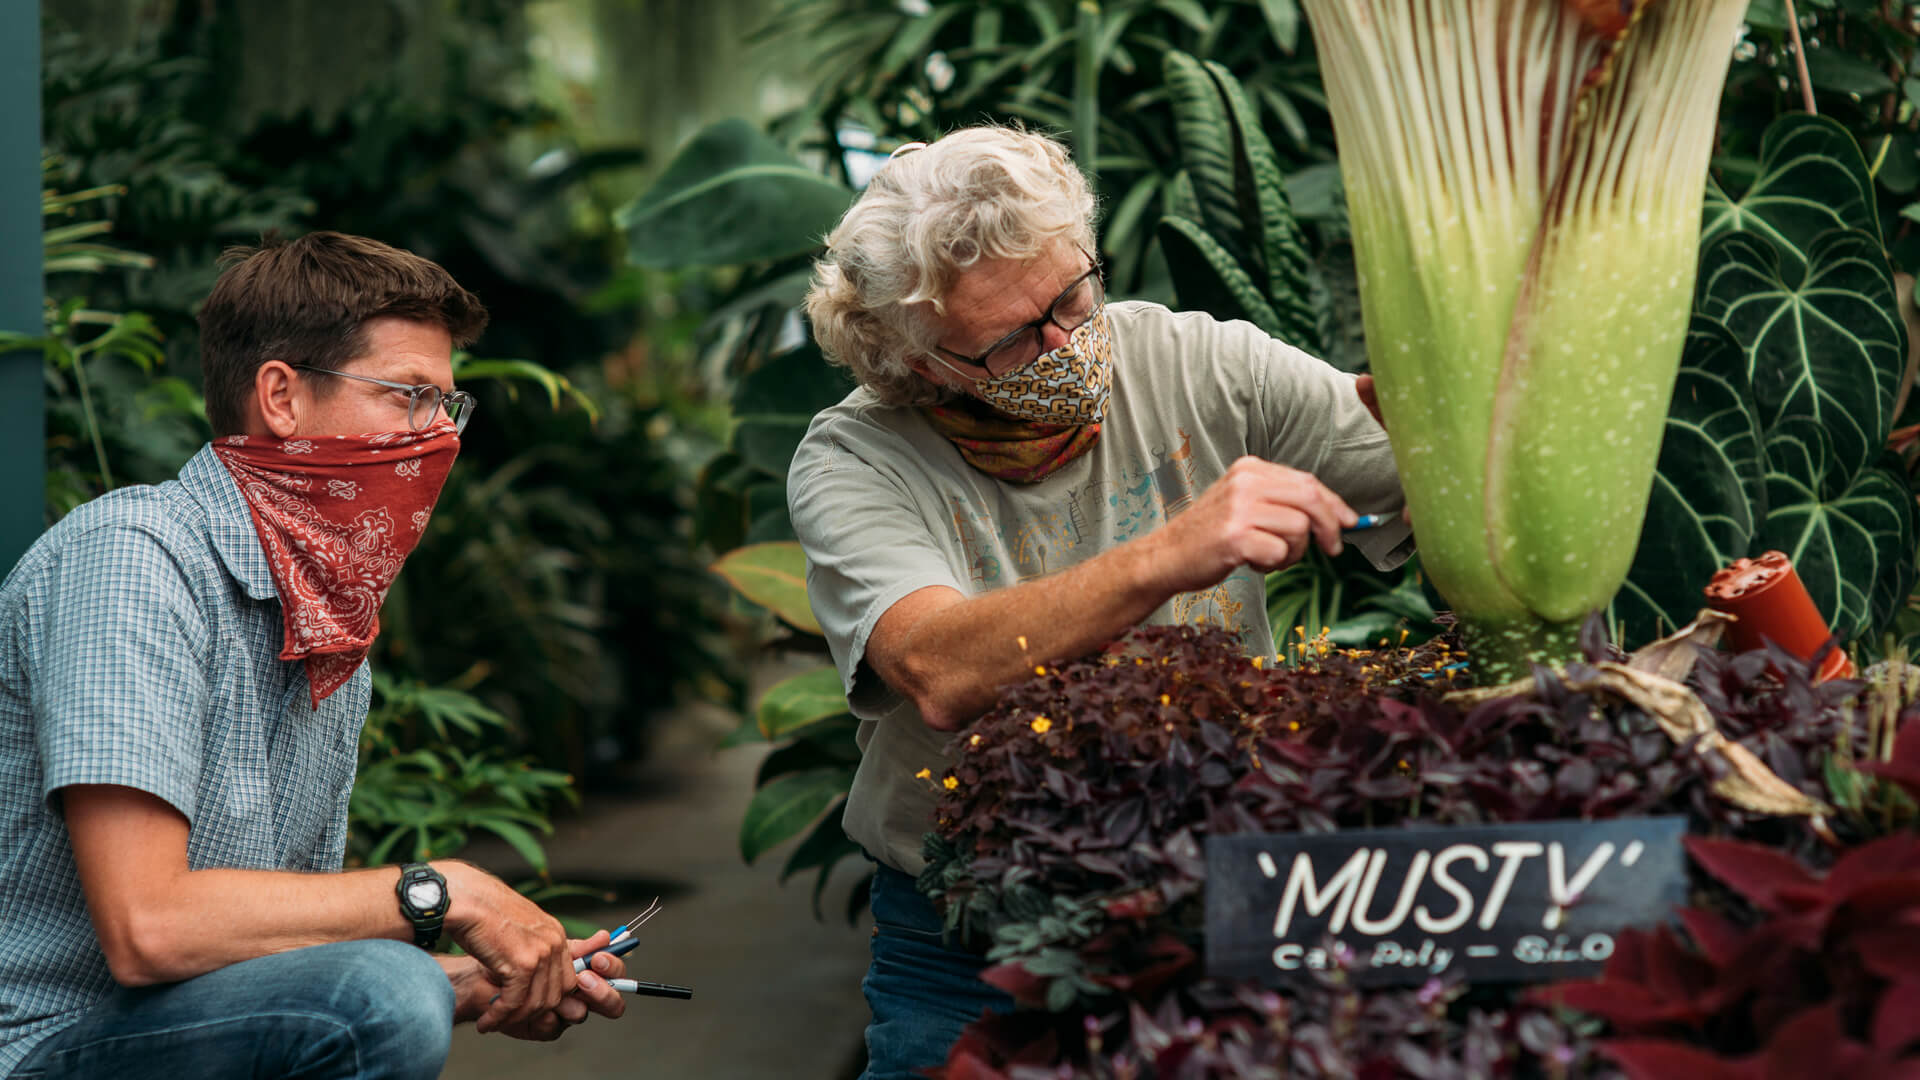 Professor Matt Ritter and Cal Poly lecturer Mike Bush cutting a hole in the Corpse Flower to apply pollen to the plant